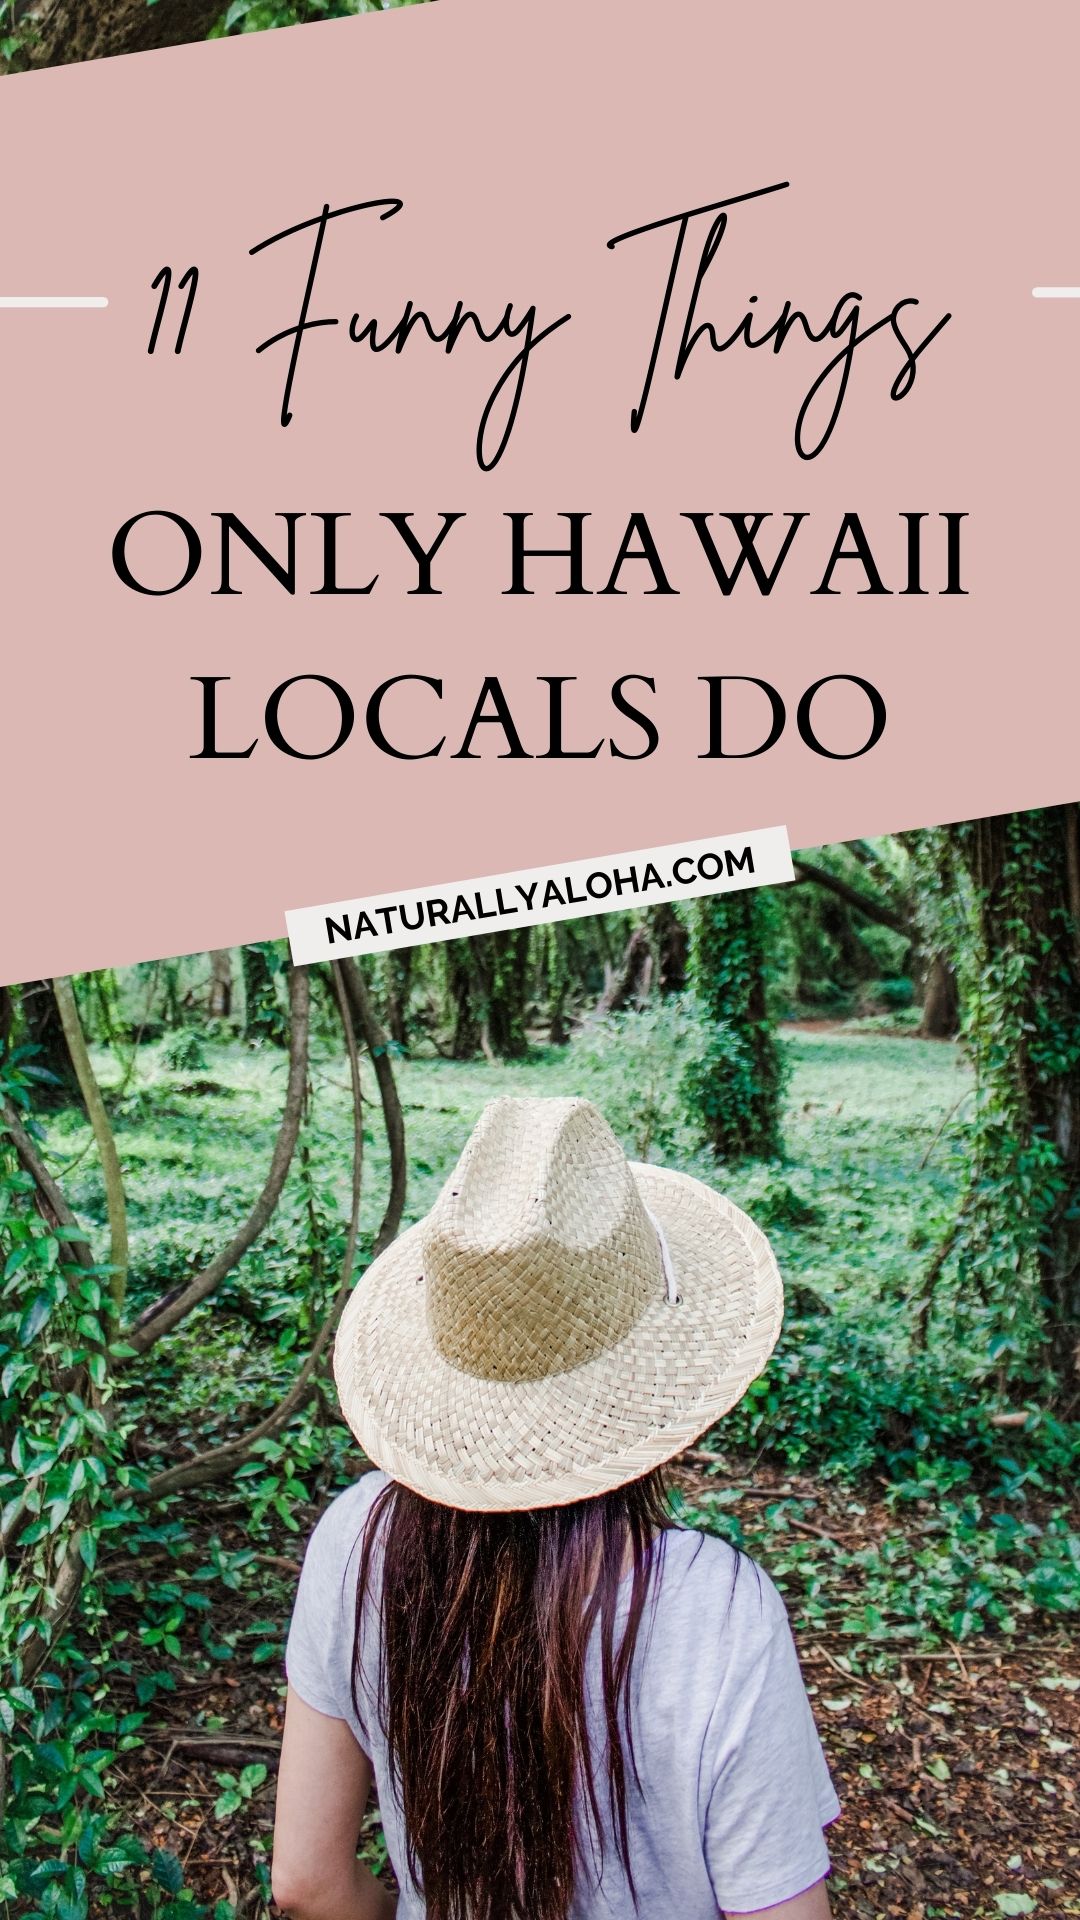 11 Interesting Things Hawaii Locals Do (That Others Don’t)